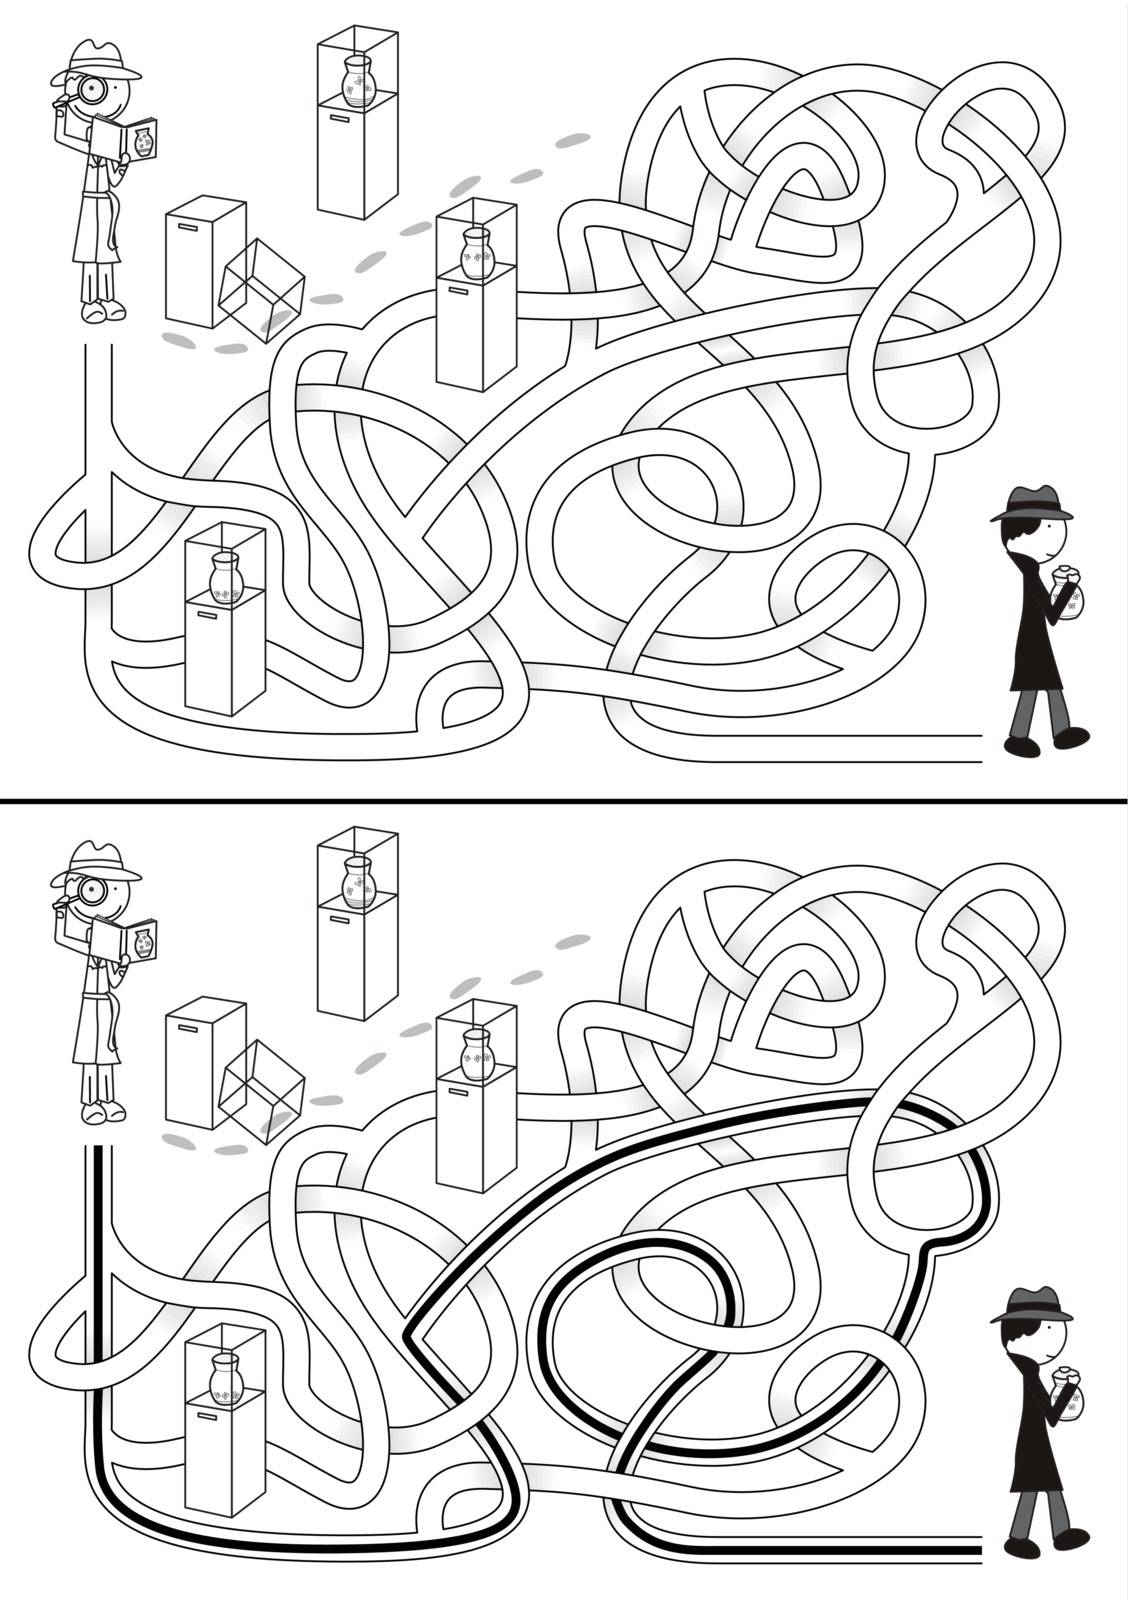 Detective maze for kids with a solution in black and white